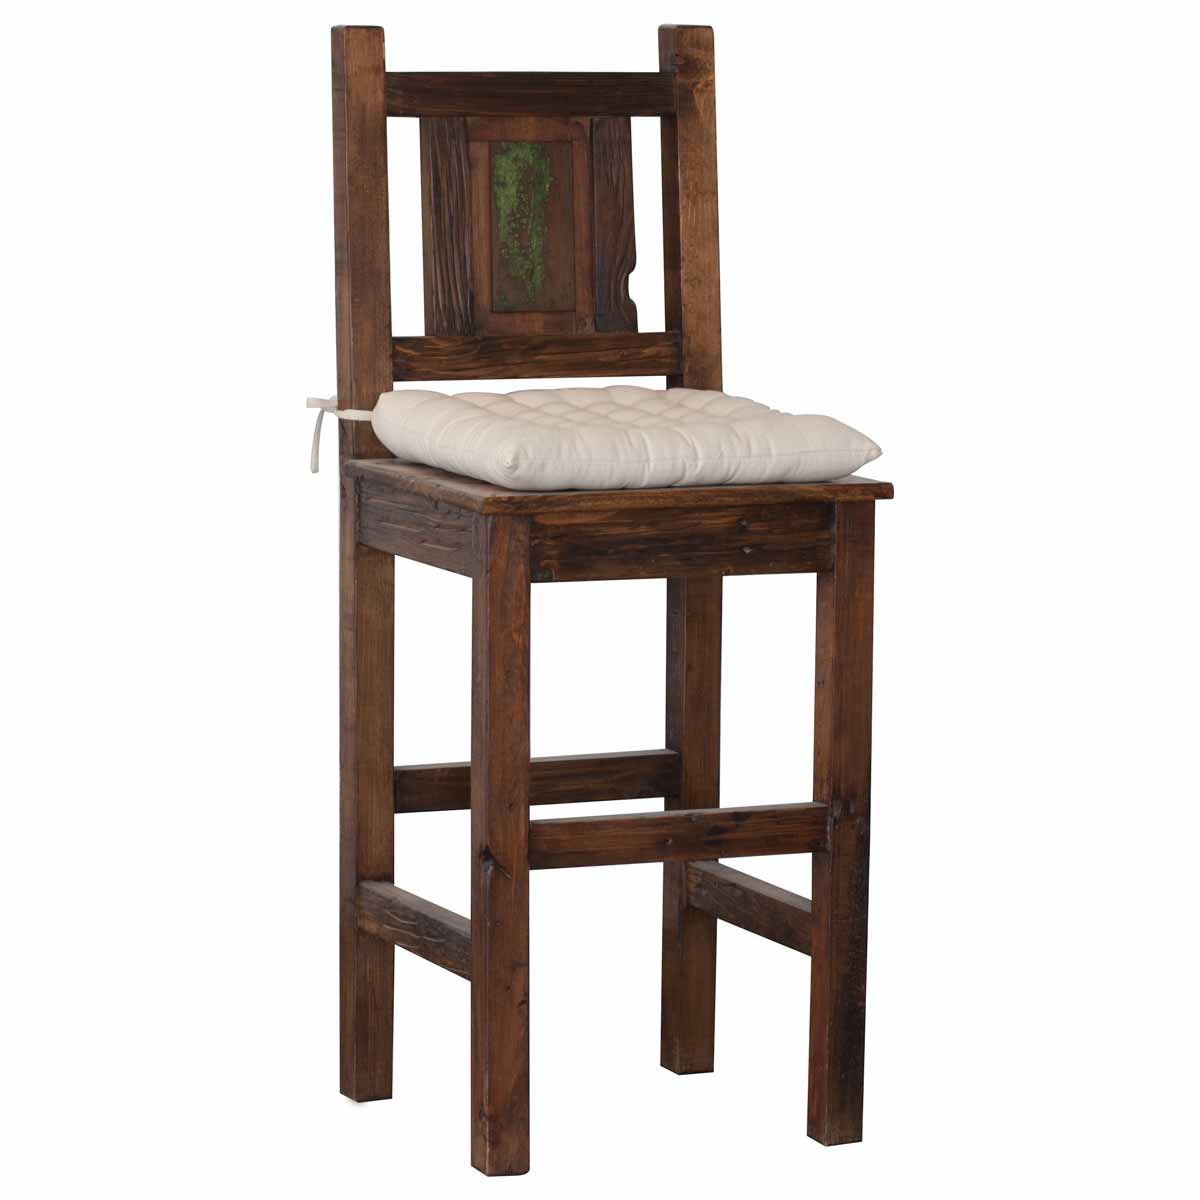 Handcrafted Rustic Sawyer Bar Stool, Western Bar Stools With Back